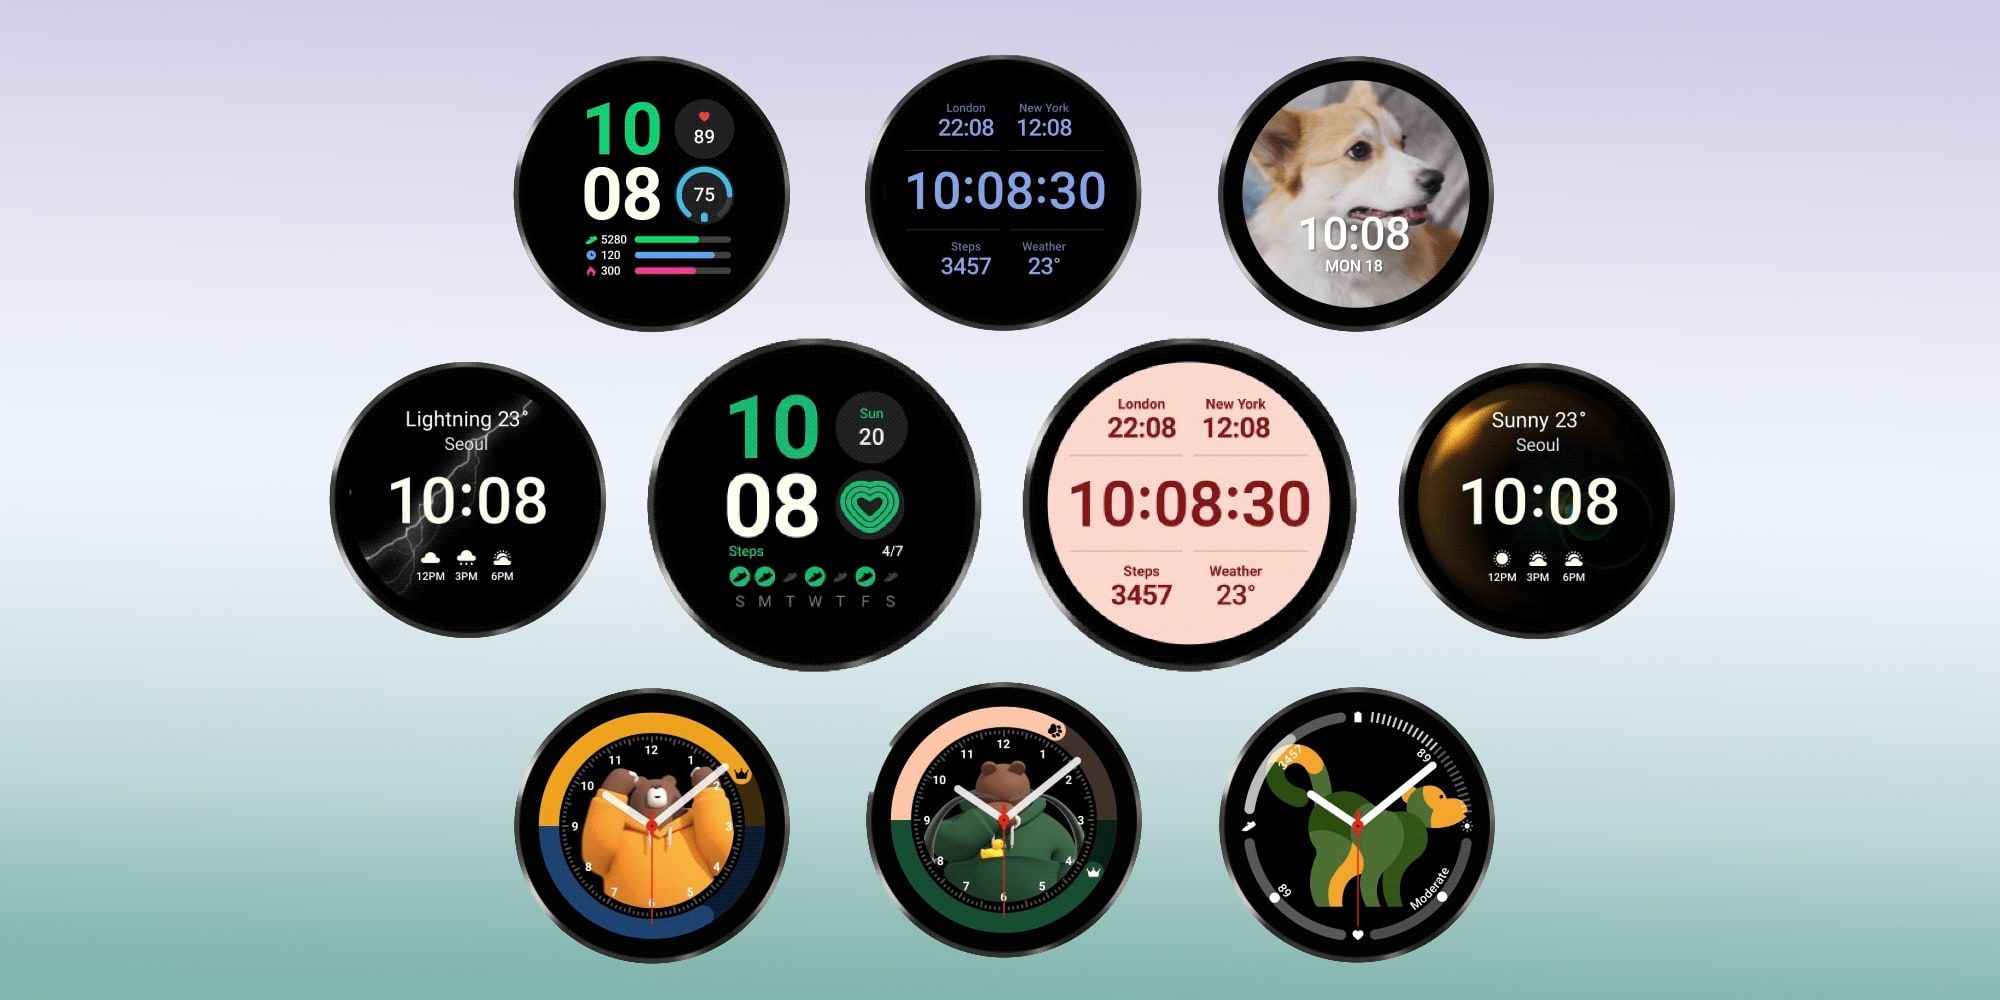 Galaxy Watch 4 October Update: Here Are The New Watch Faces And Complications